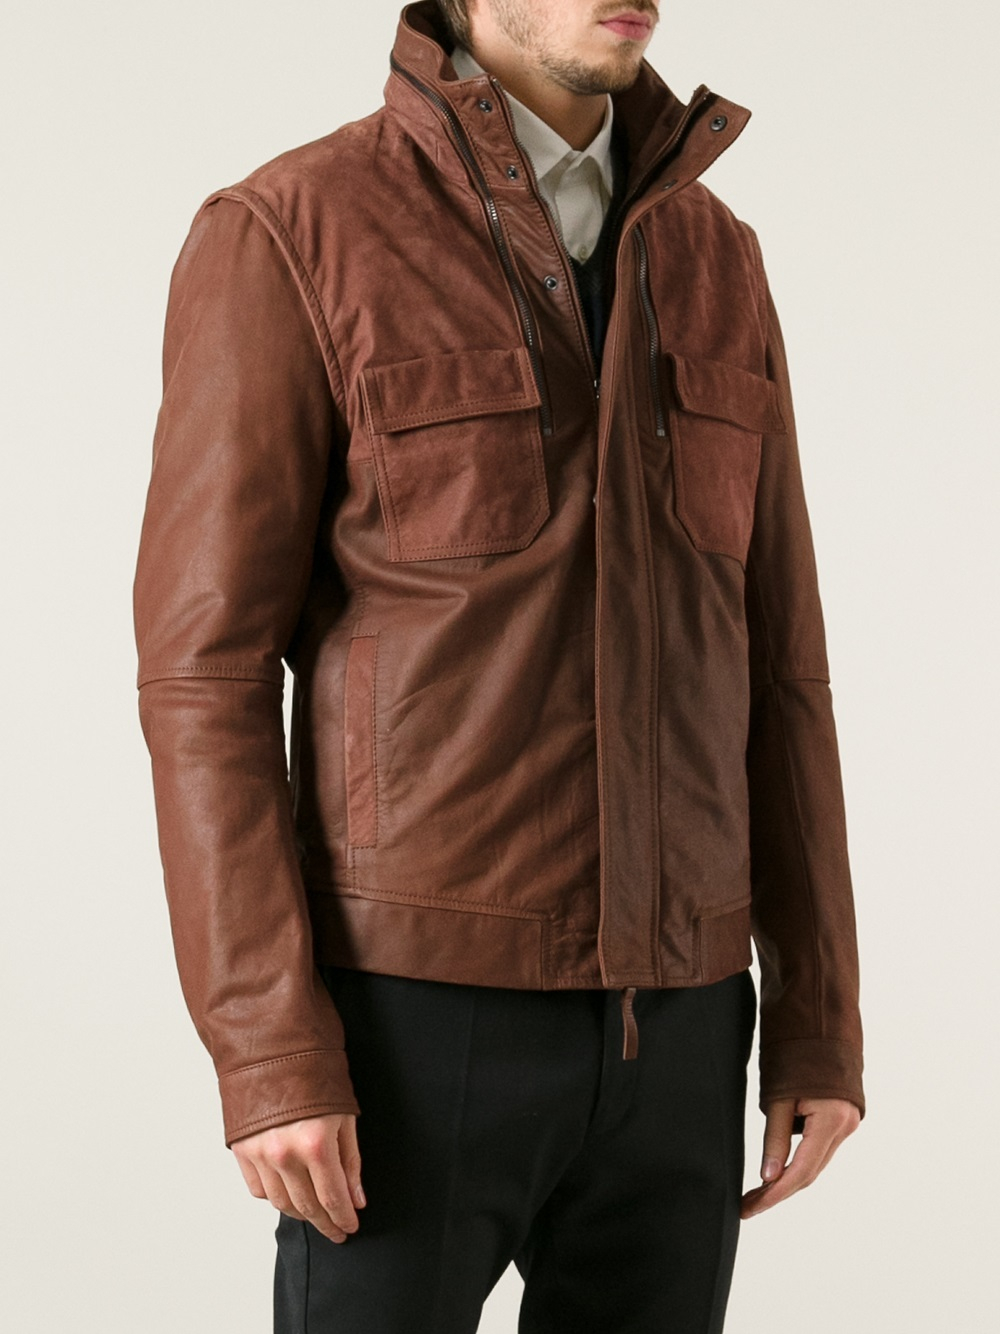 Lyst - Emporio Armani Leather Jacket in Brown for Men